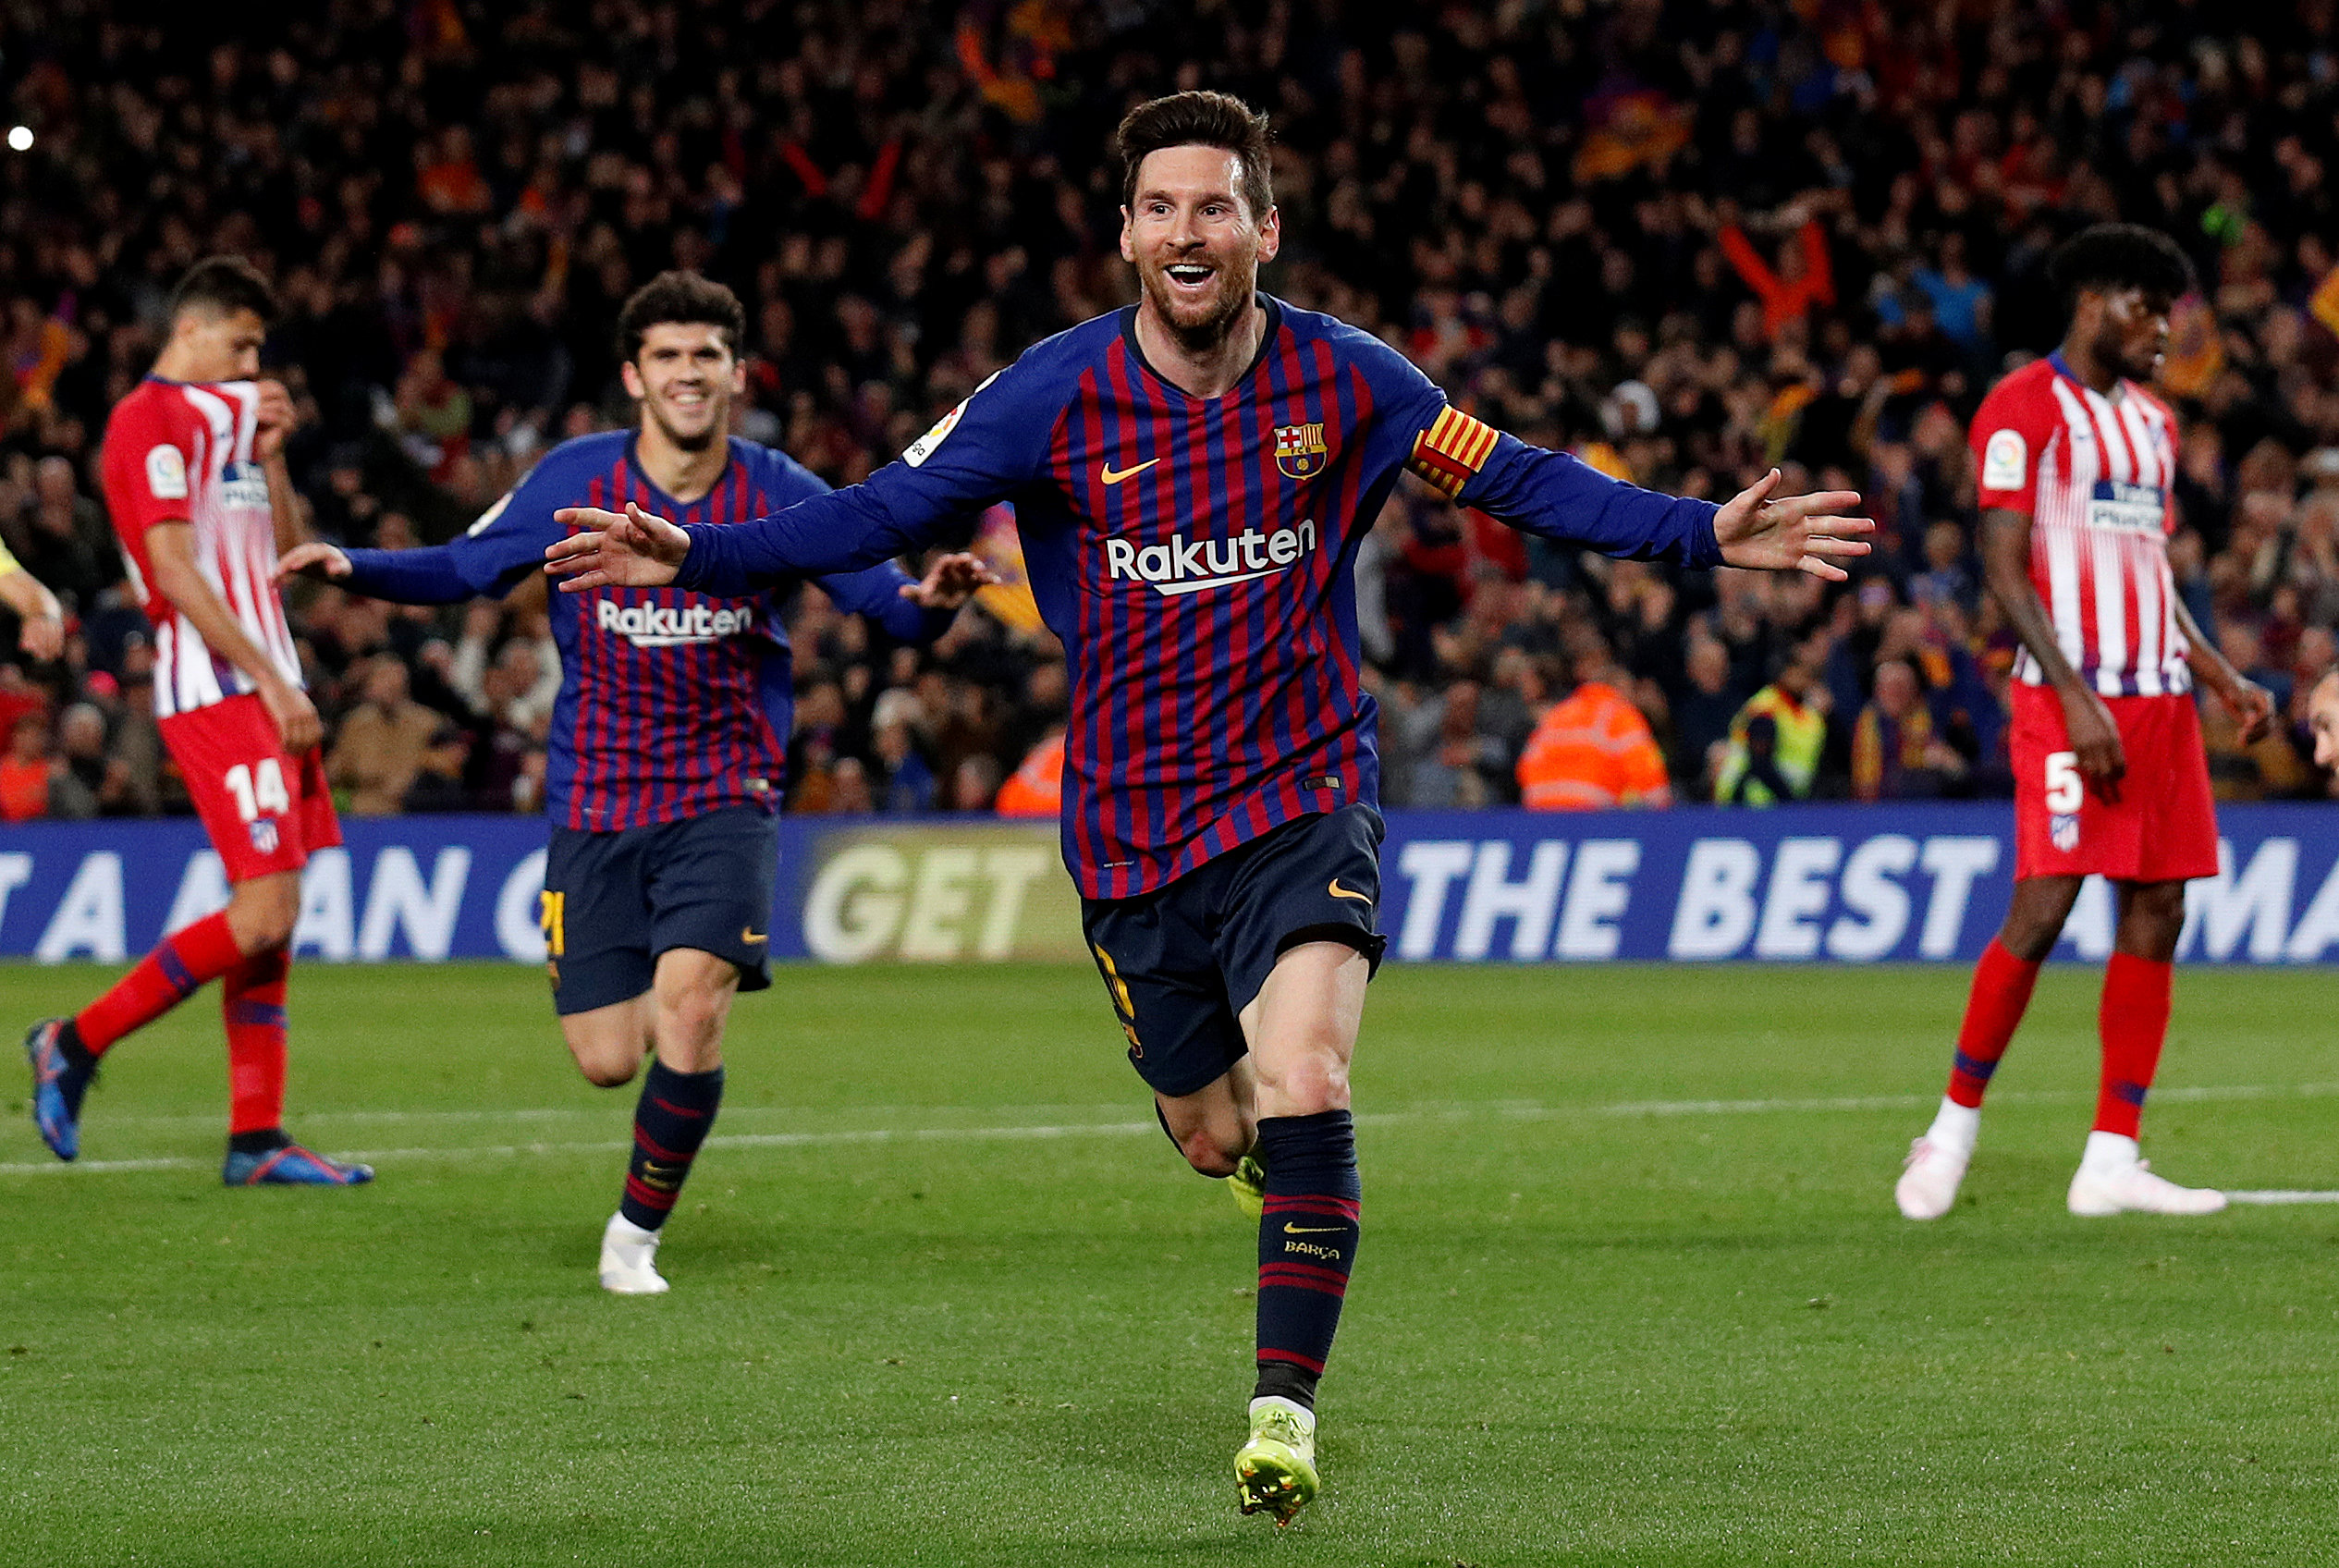 Leo Messi celebrates his goal against Atlético Madrid in Camp Nou on April 6, 2019 (by Reuters/Albert Gea)